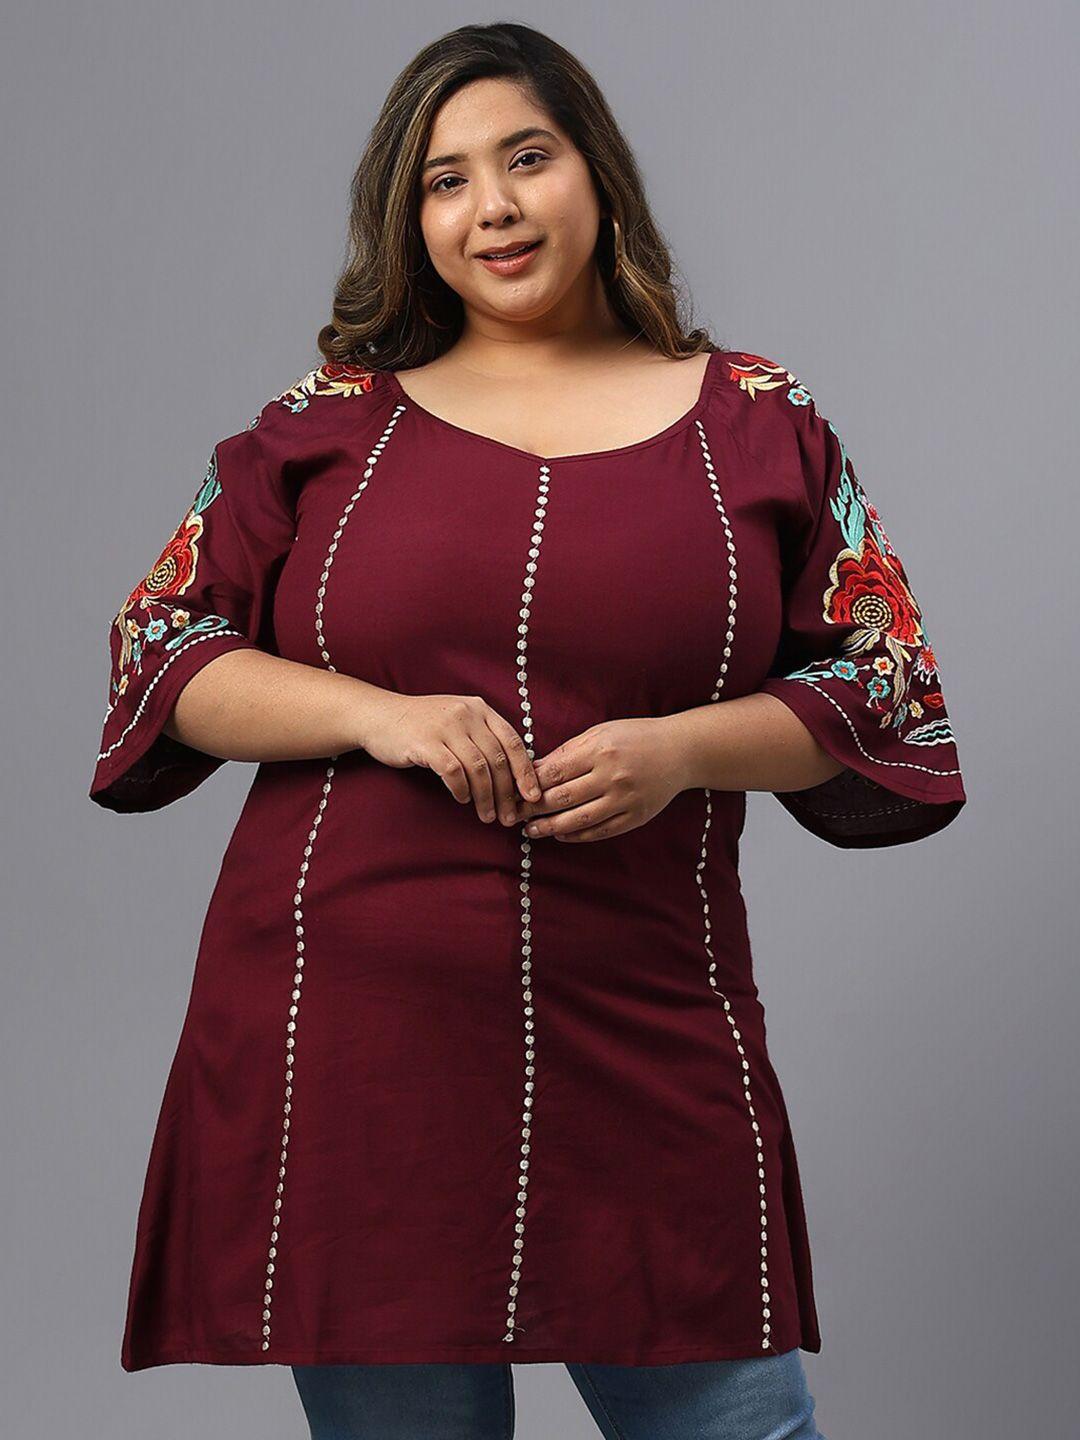 saakaa plus size floral embroidery cotton regular top